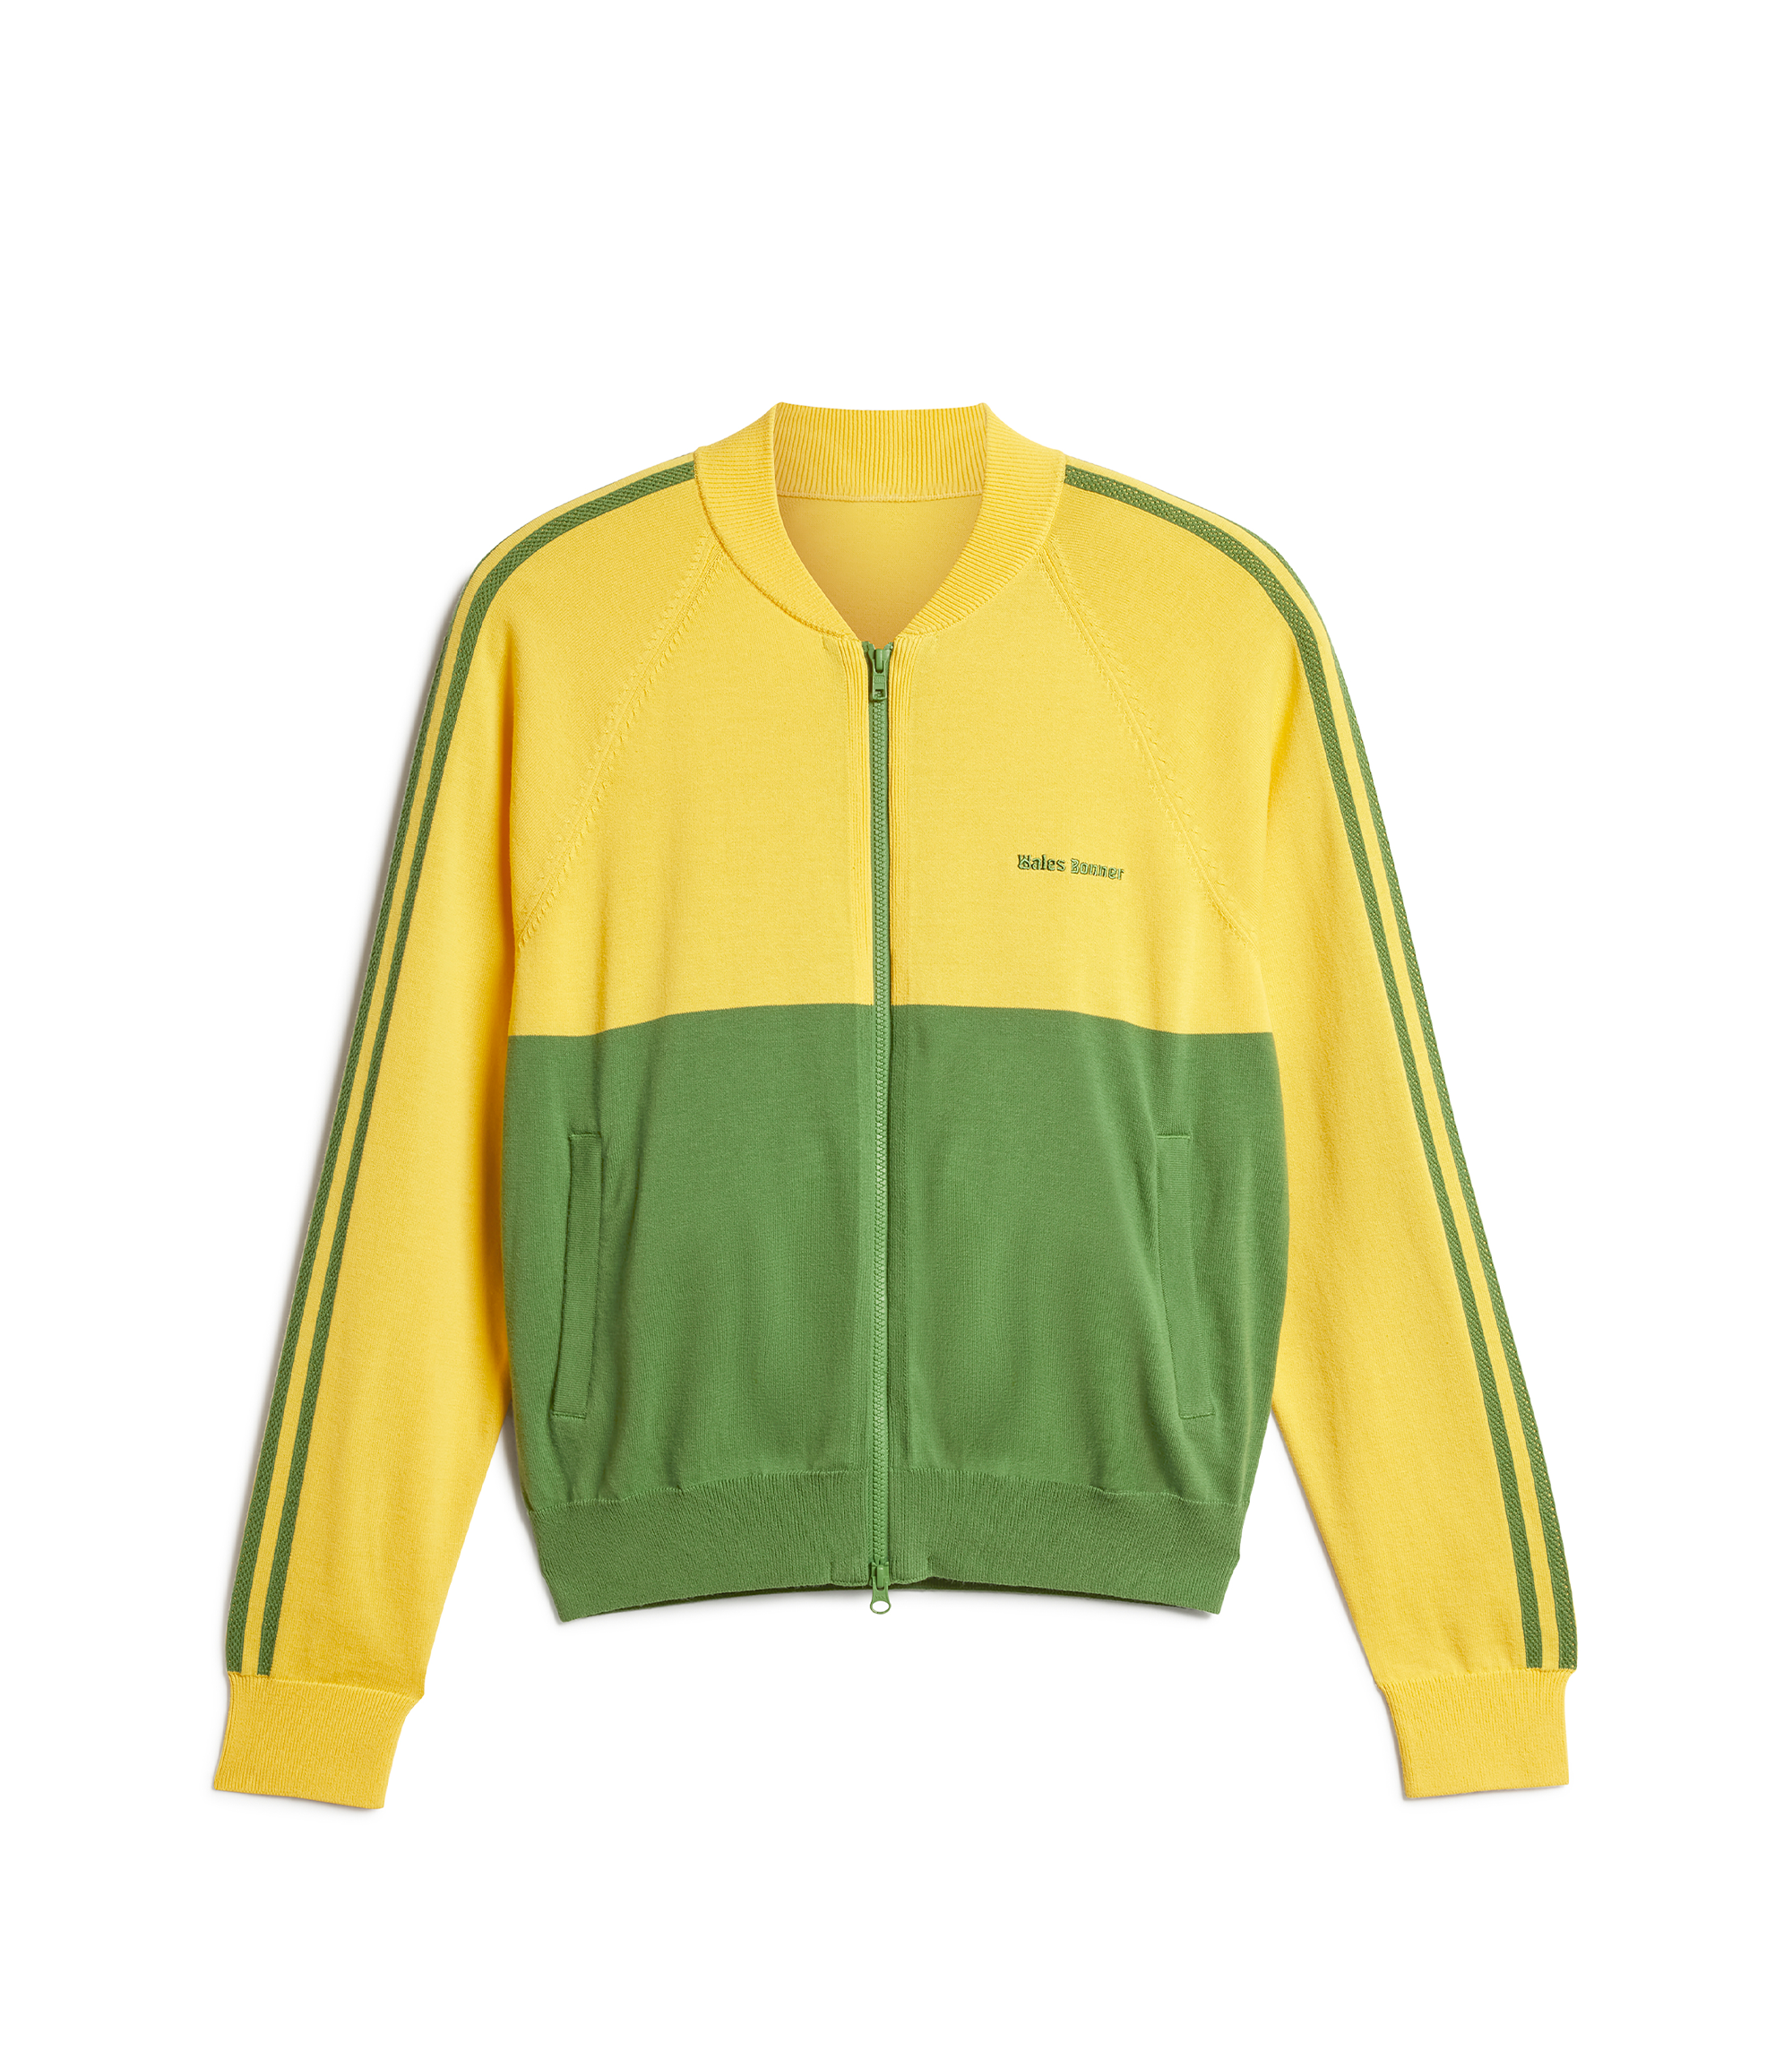 Wales Bonner Jersey Track Top - Gold / Green